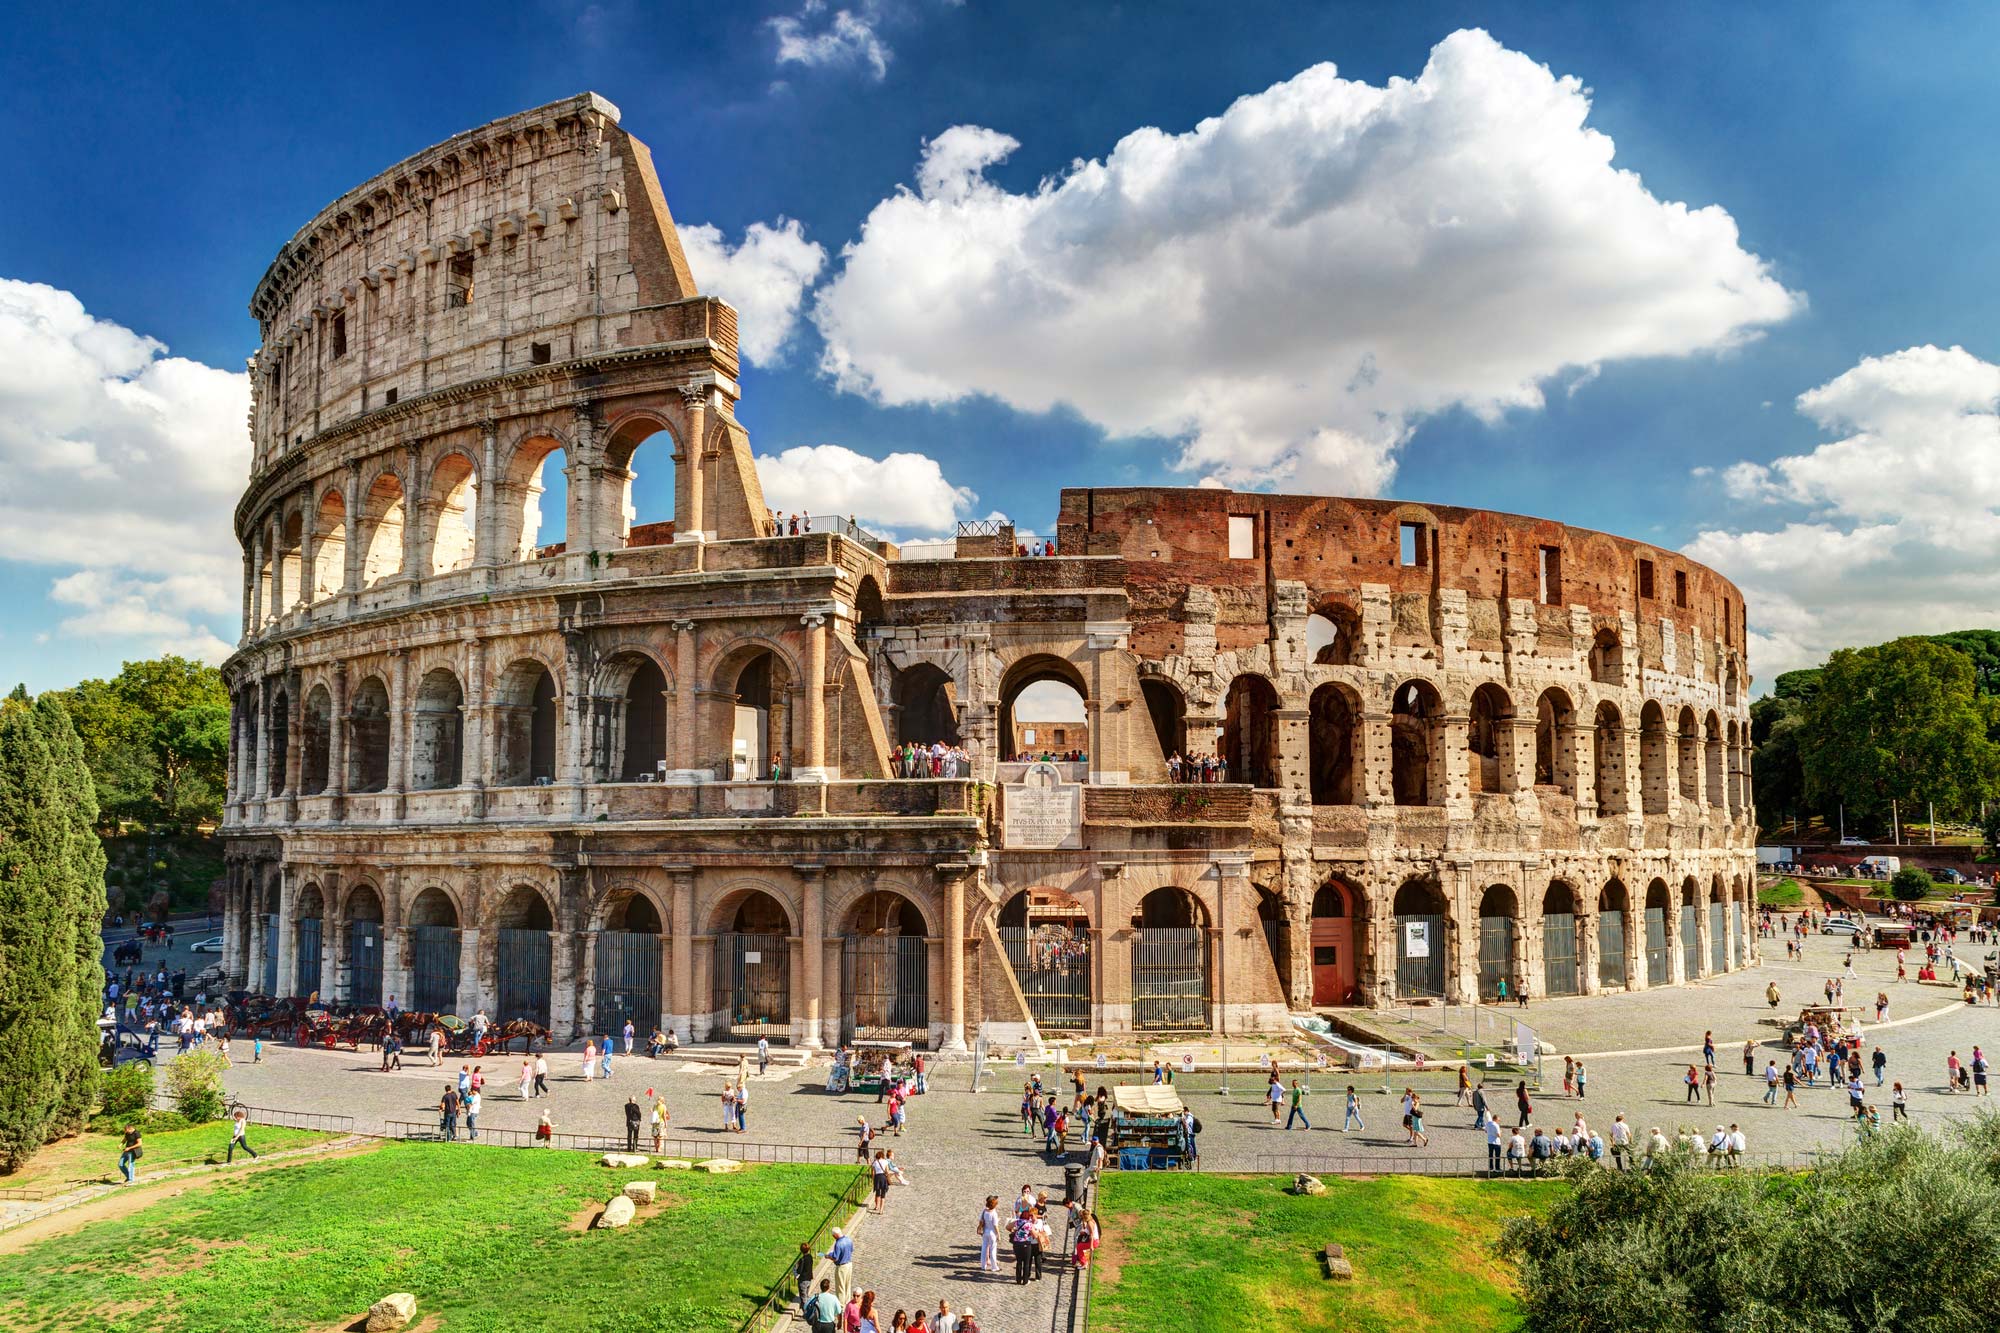 What happened in the Colosseum in Rome?